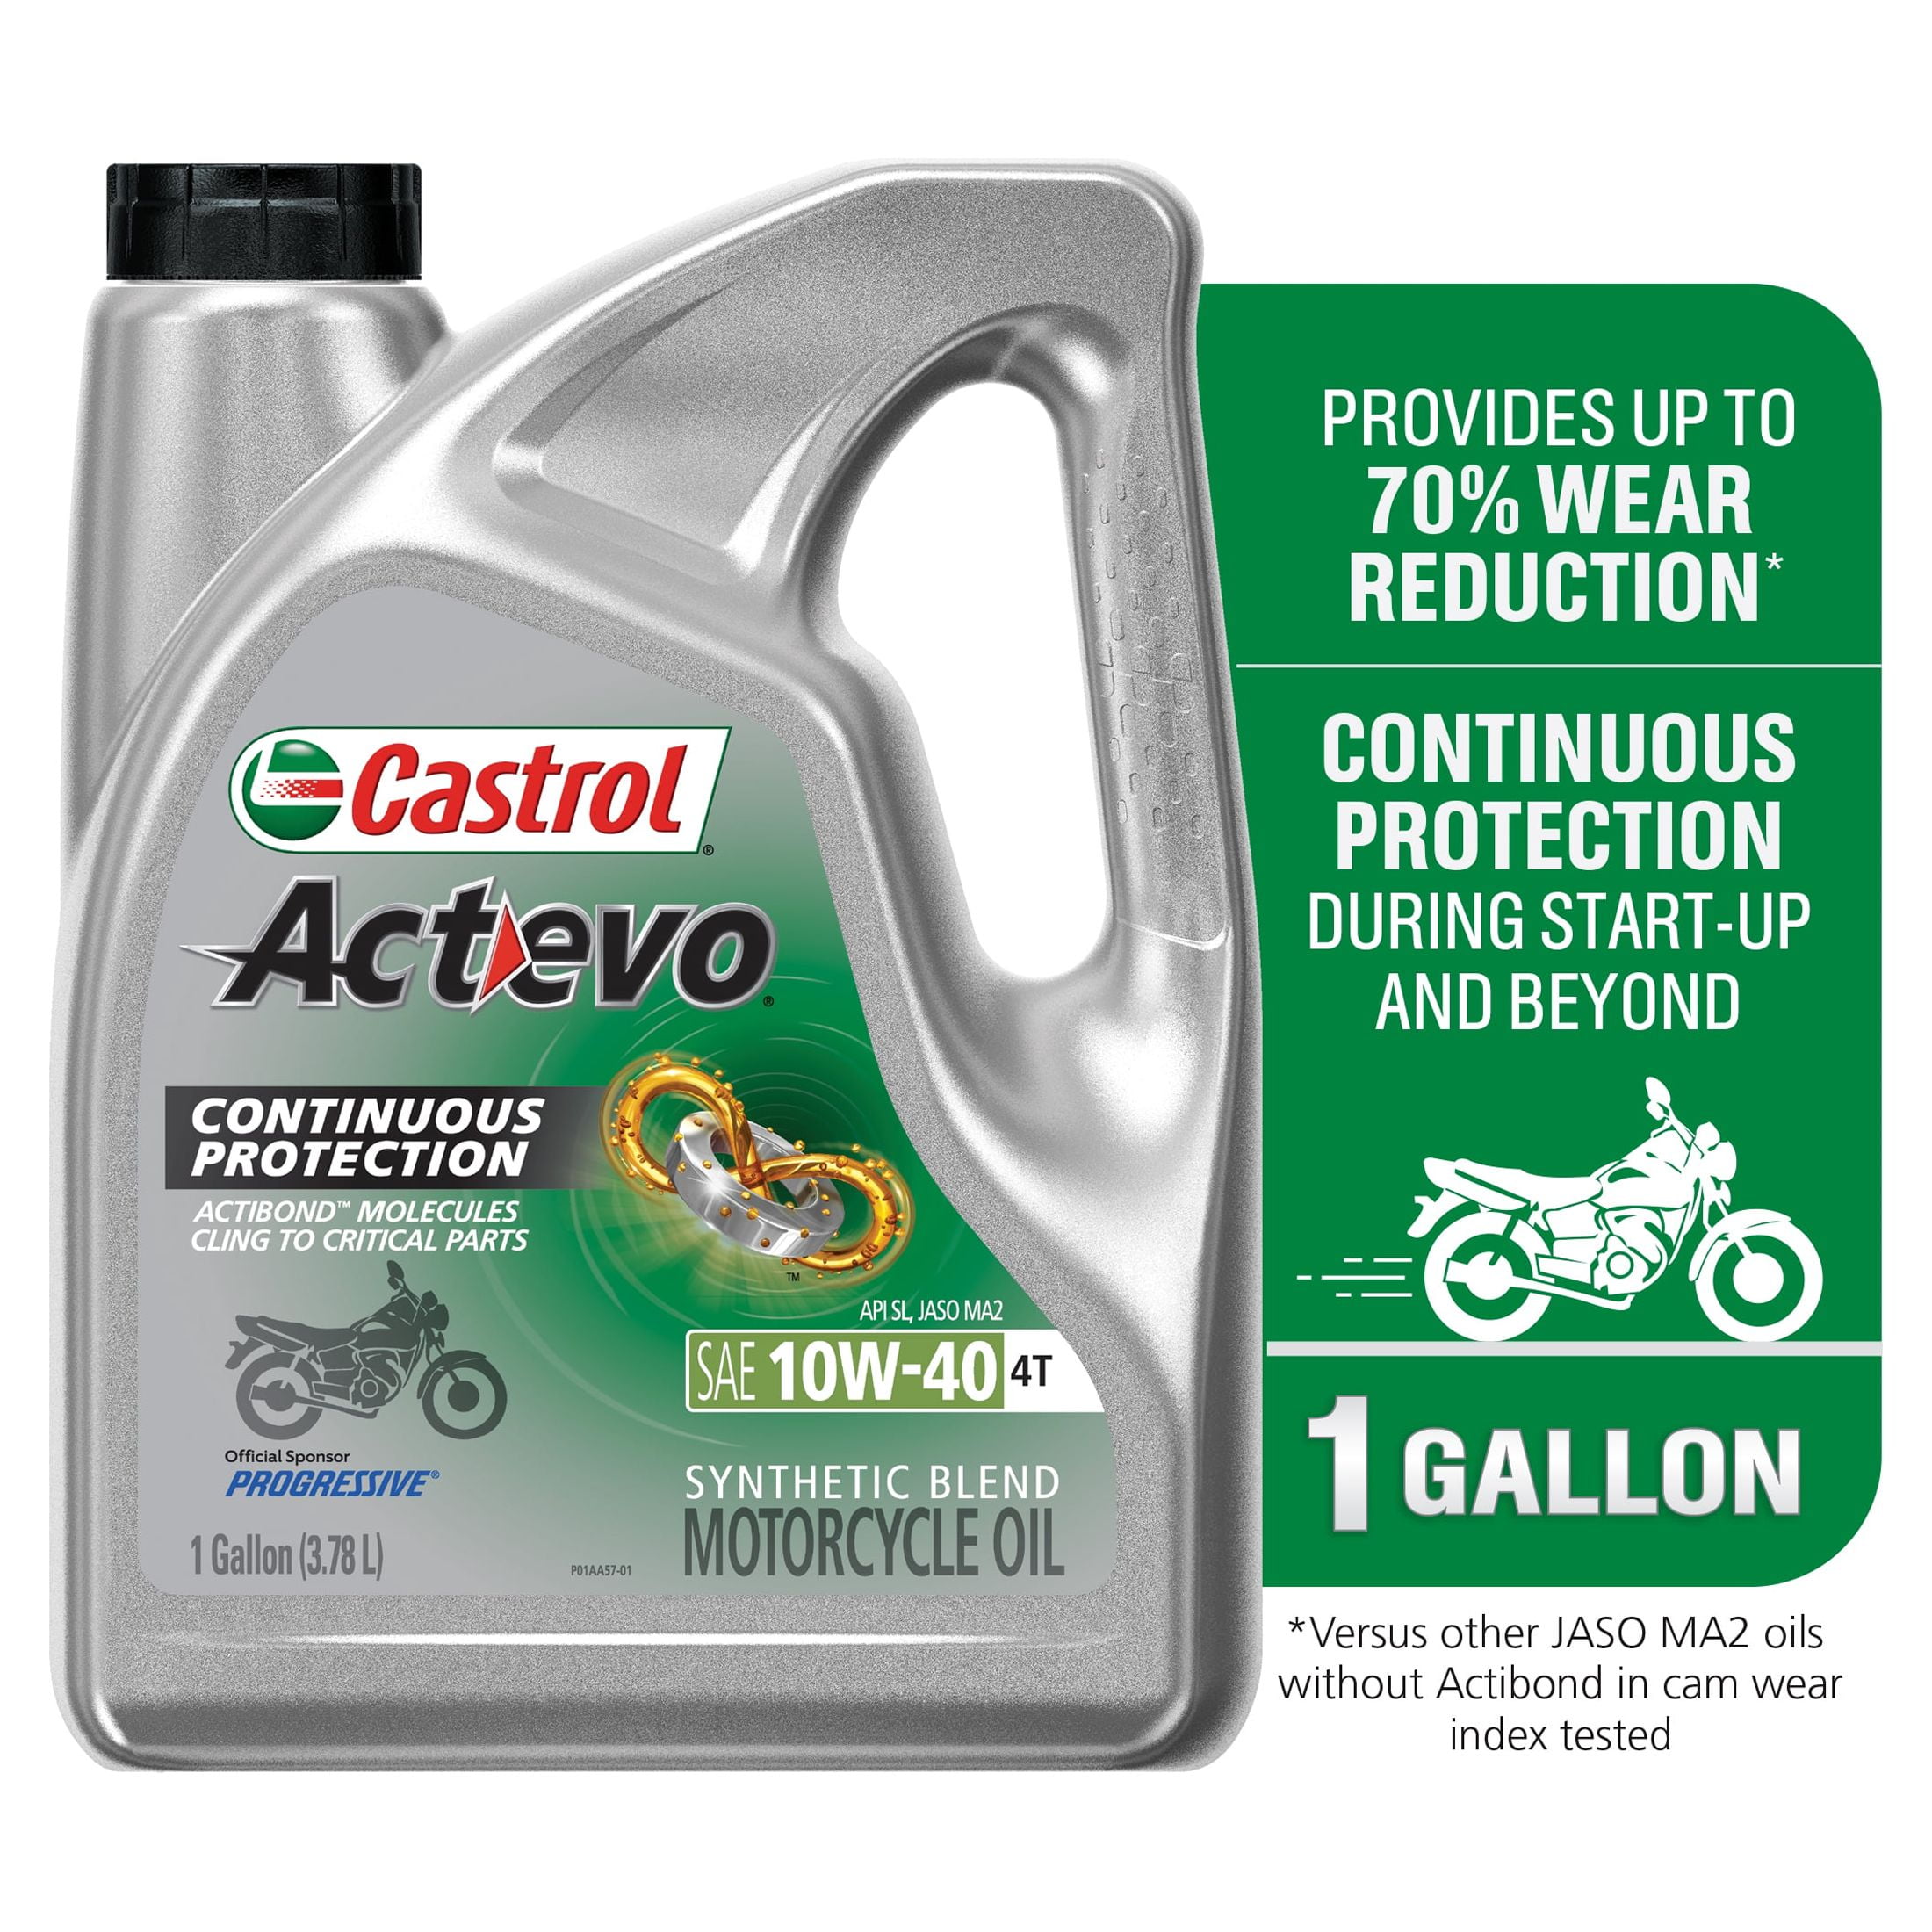 Castrol Actevo 4T 10W-40 Part Synthetic Motorcycle Oil, 1 Gallon